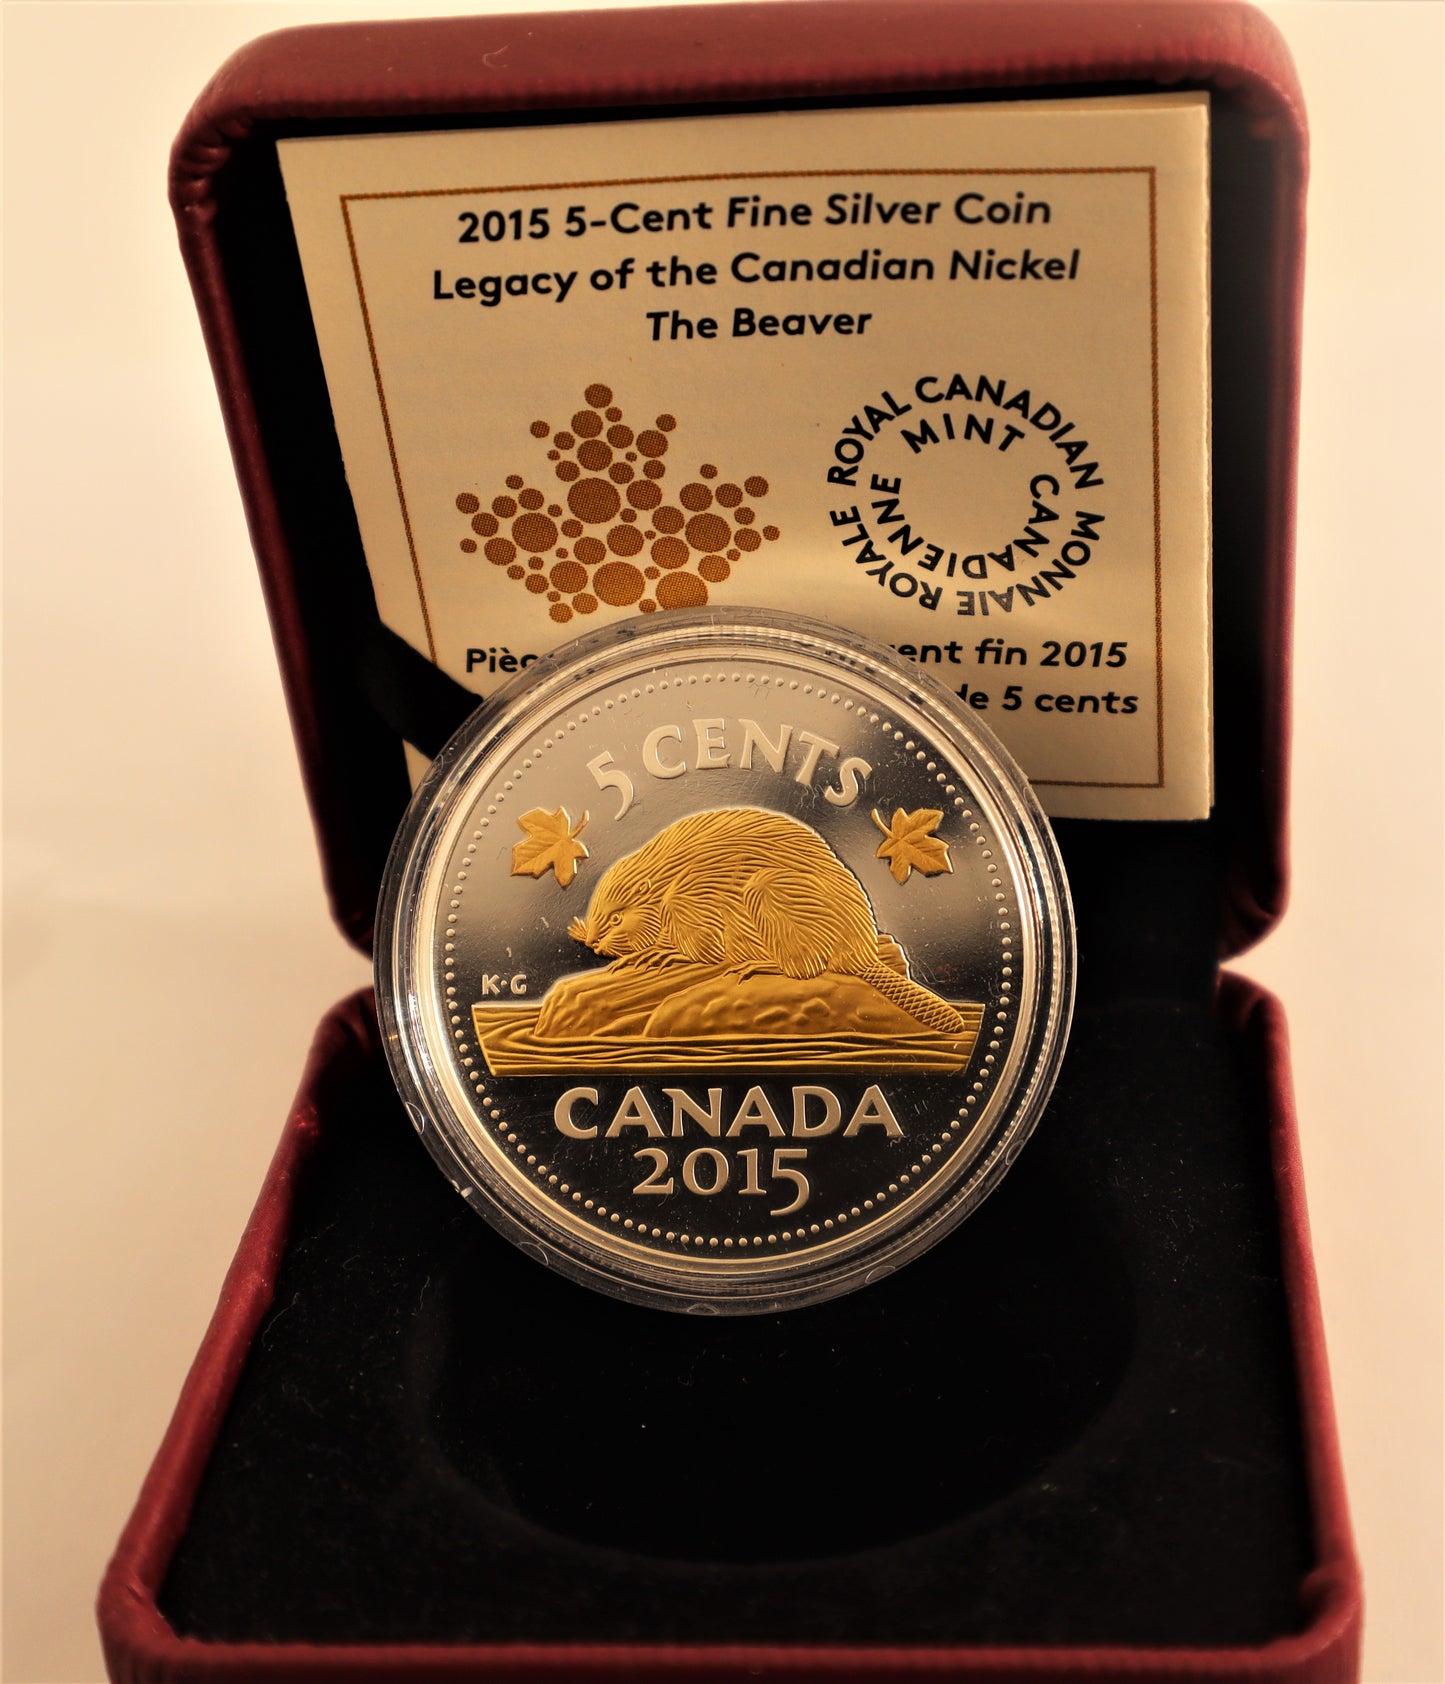 2015 5-Cent Fine Silver Coin Legacy of the Canadian Nickel The Beaver